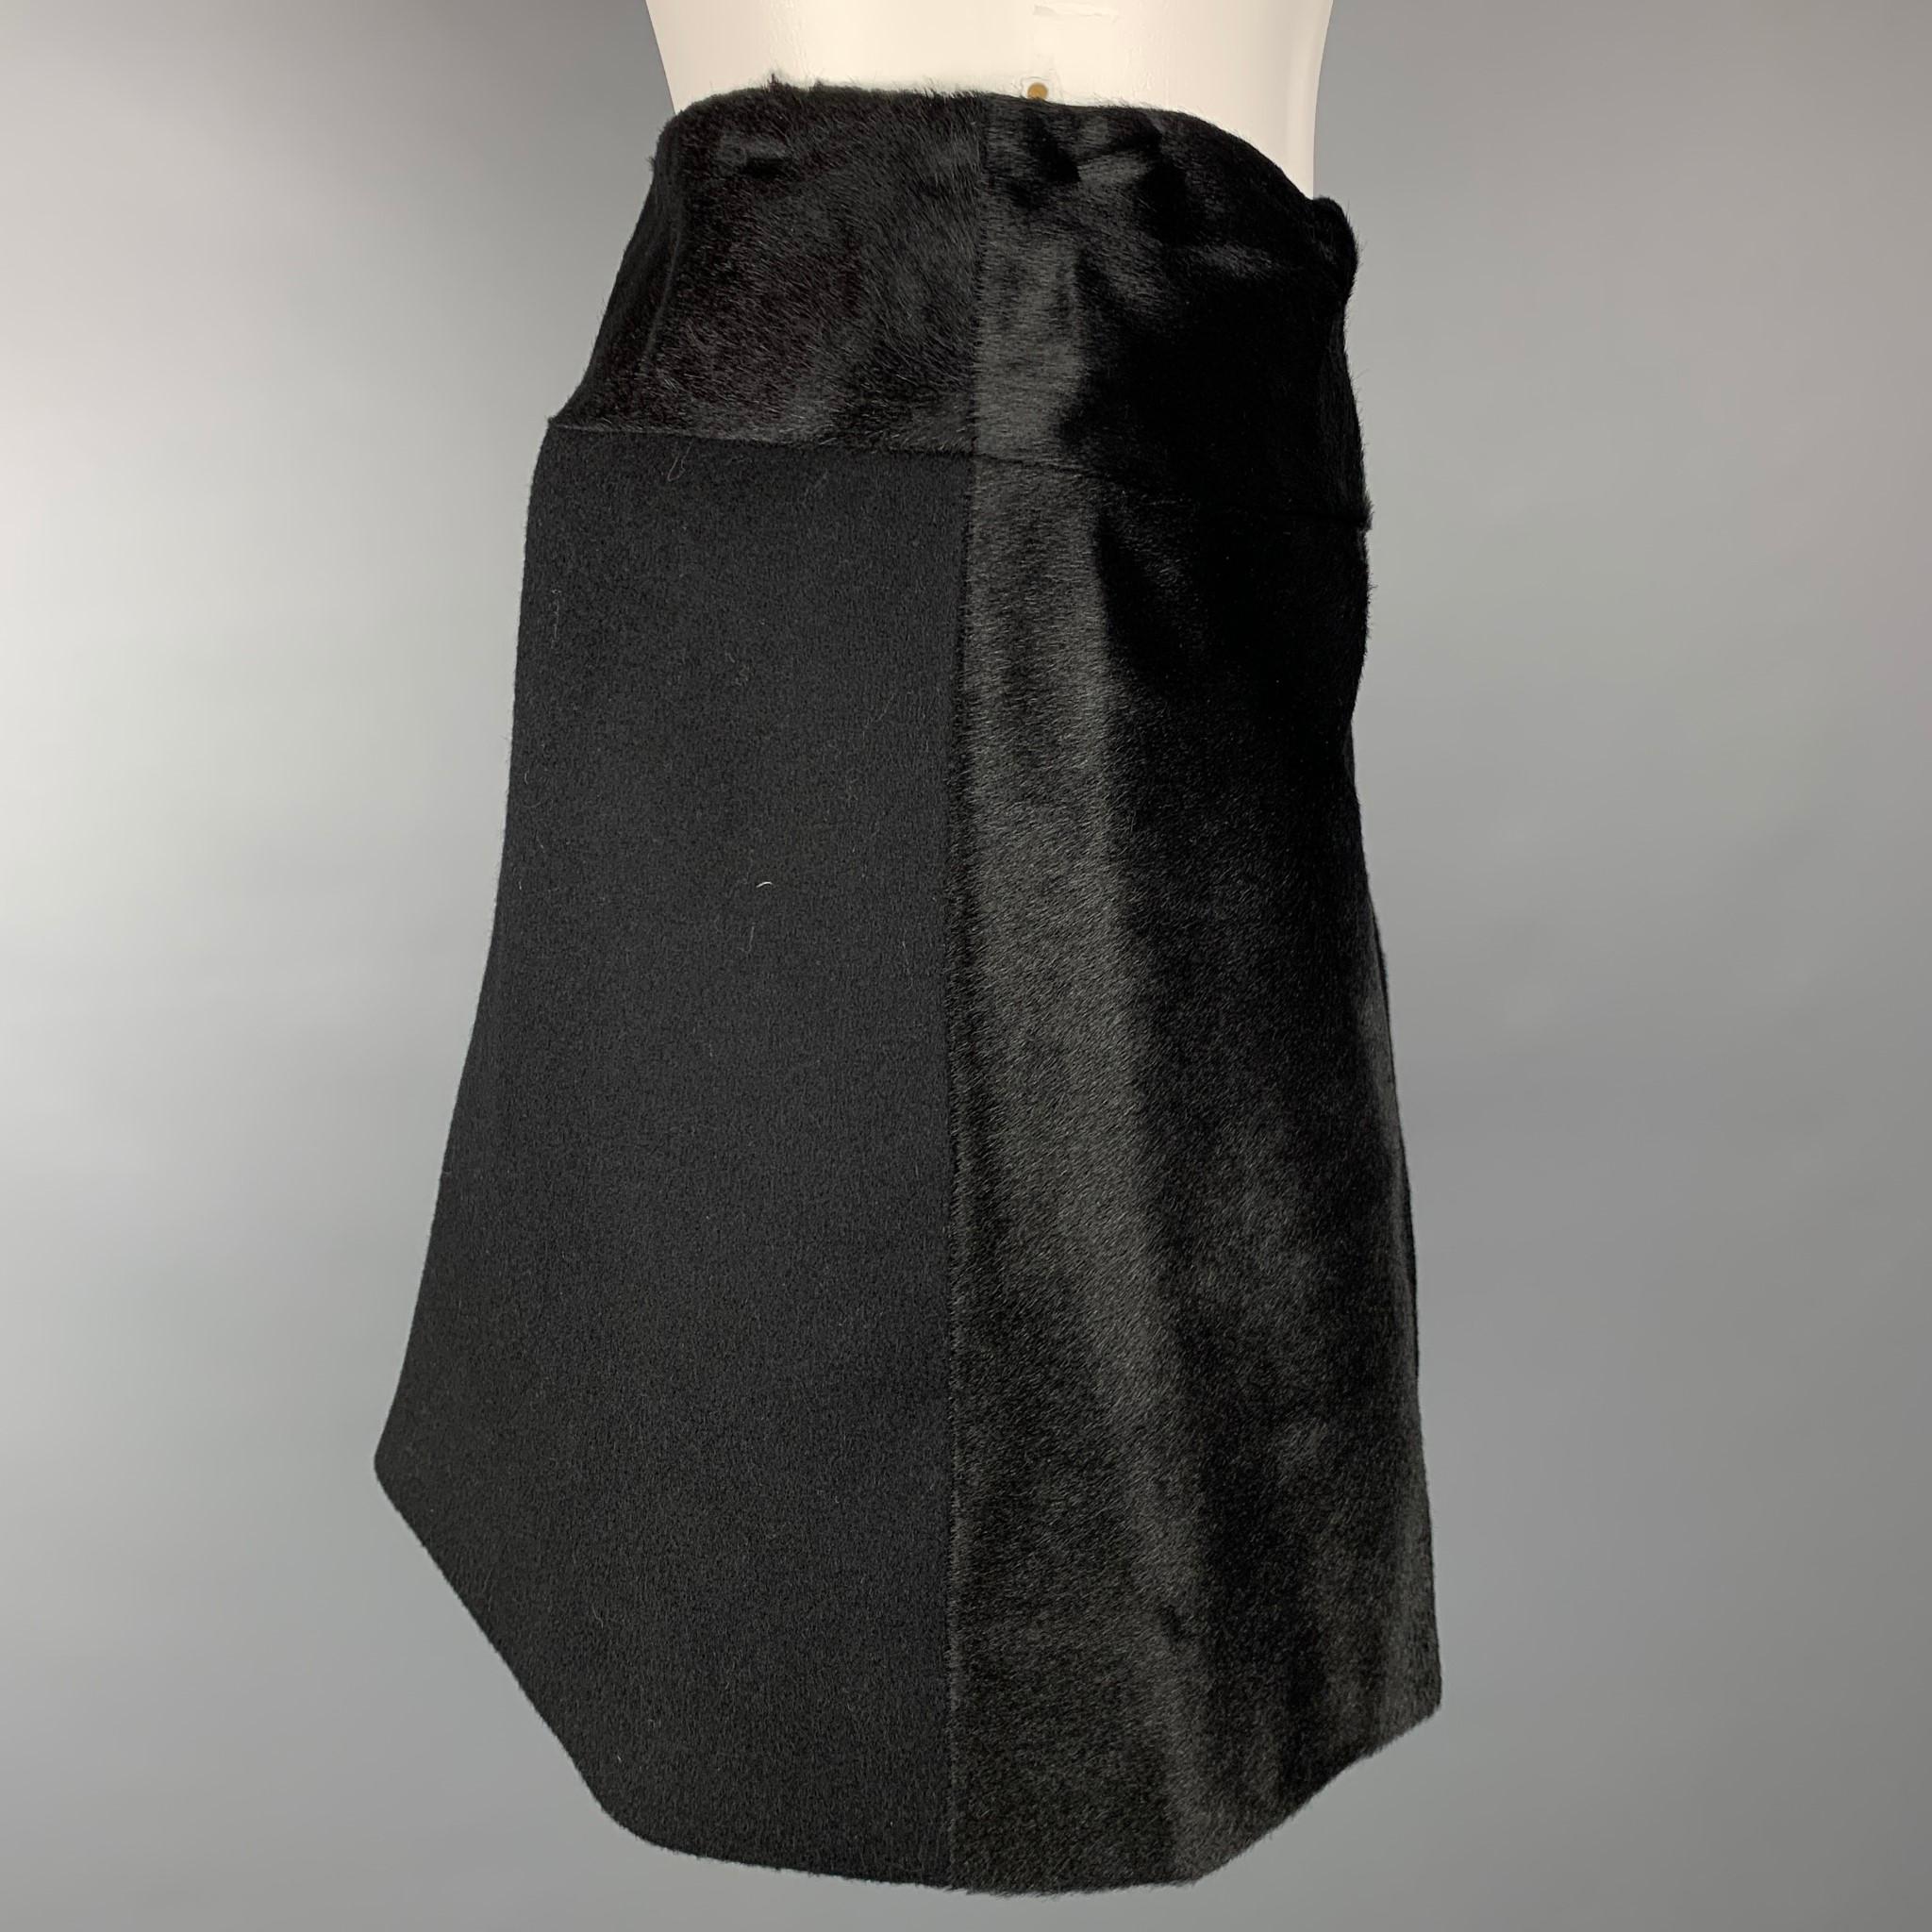 THEORY mini skirt comes in a black wool / nylon with a calf hair panel design featuring wrap style and a front tab closure.

New With Tags. 
Marked: 2

Measurements:

Waist: 29 in.
Hip: 34 in.
Length: 16 in. 